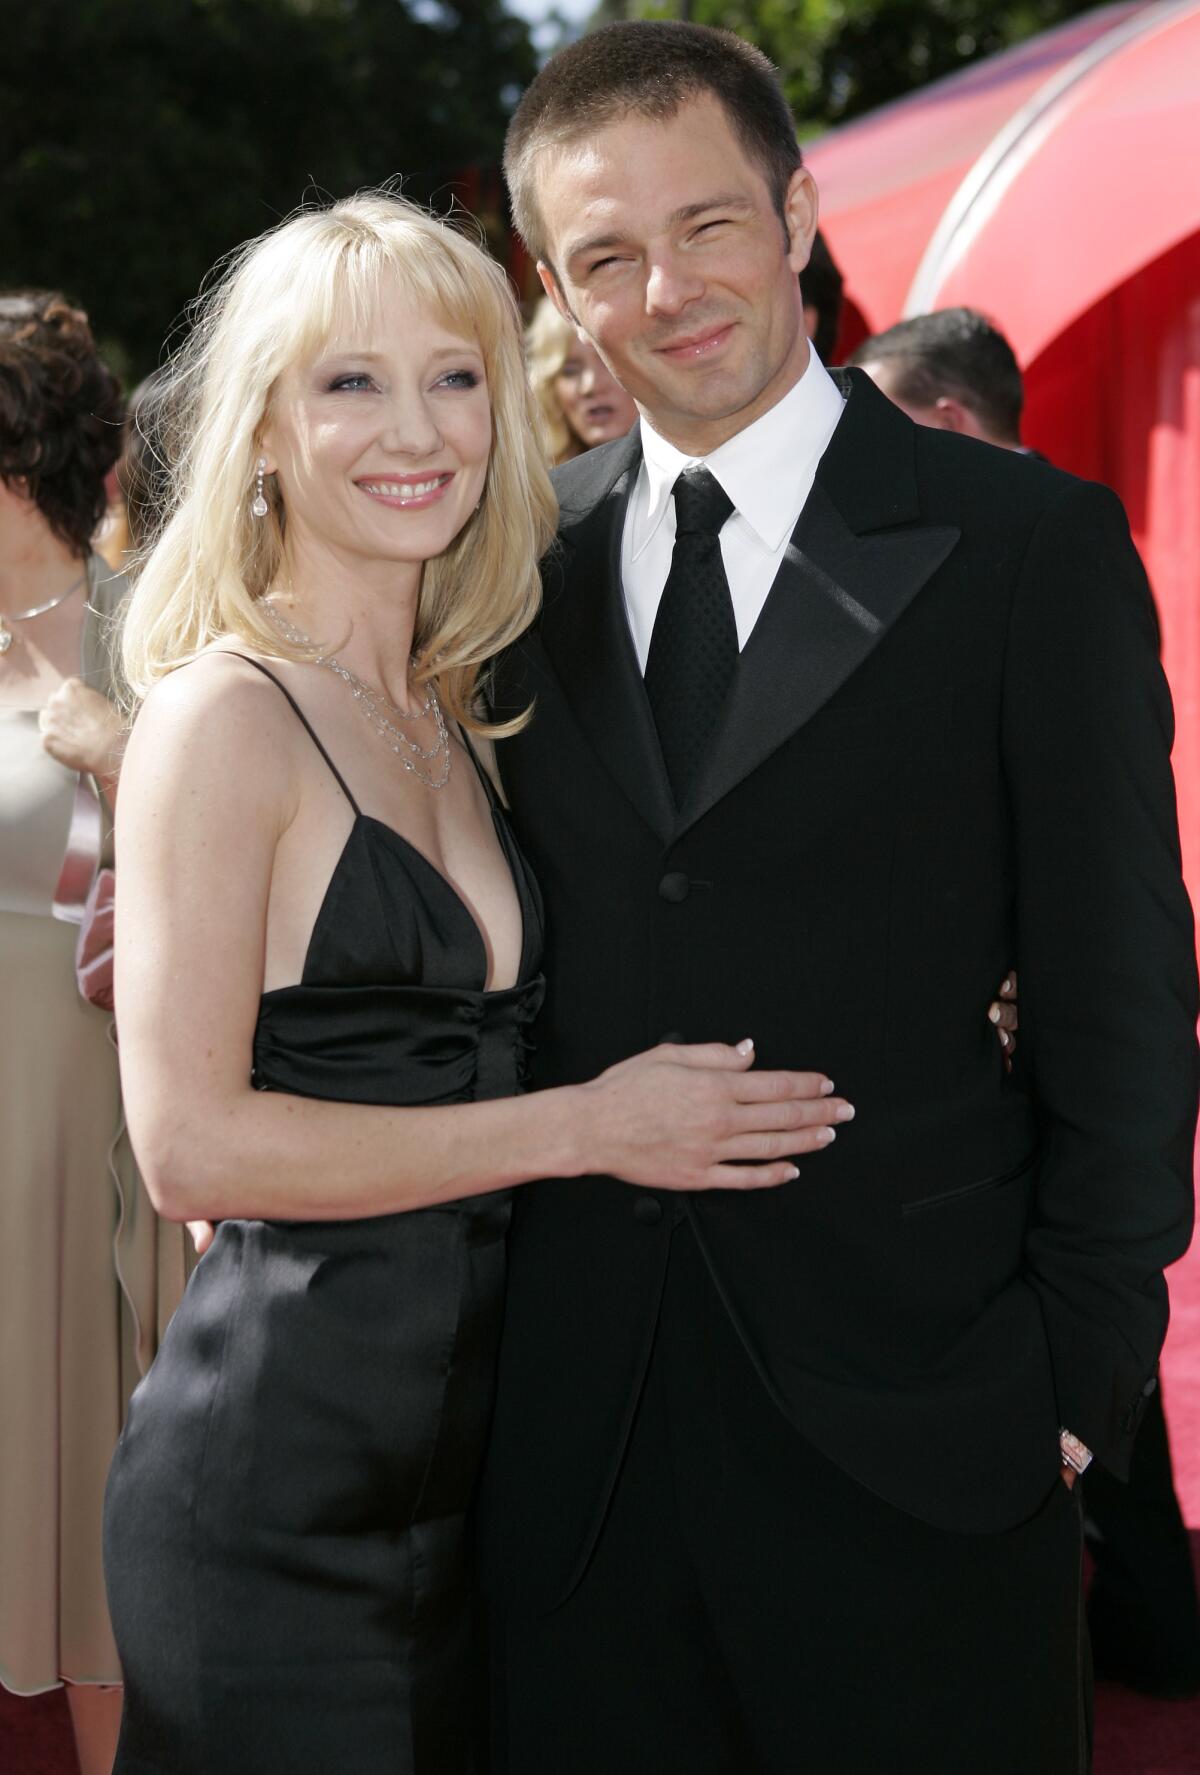 A blonde woman in a black dress embraces a man in a suit